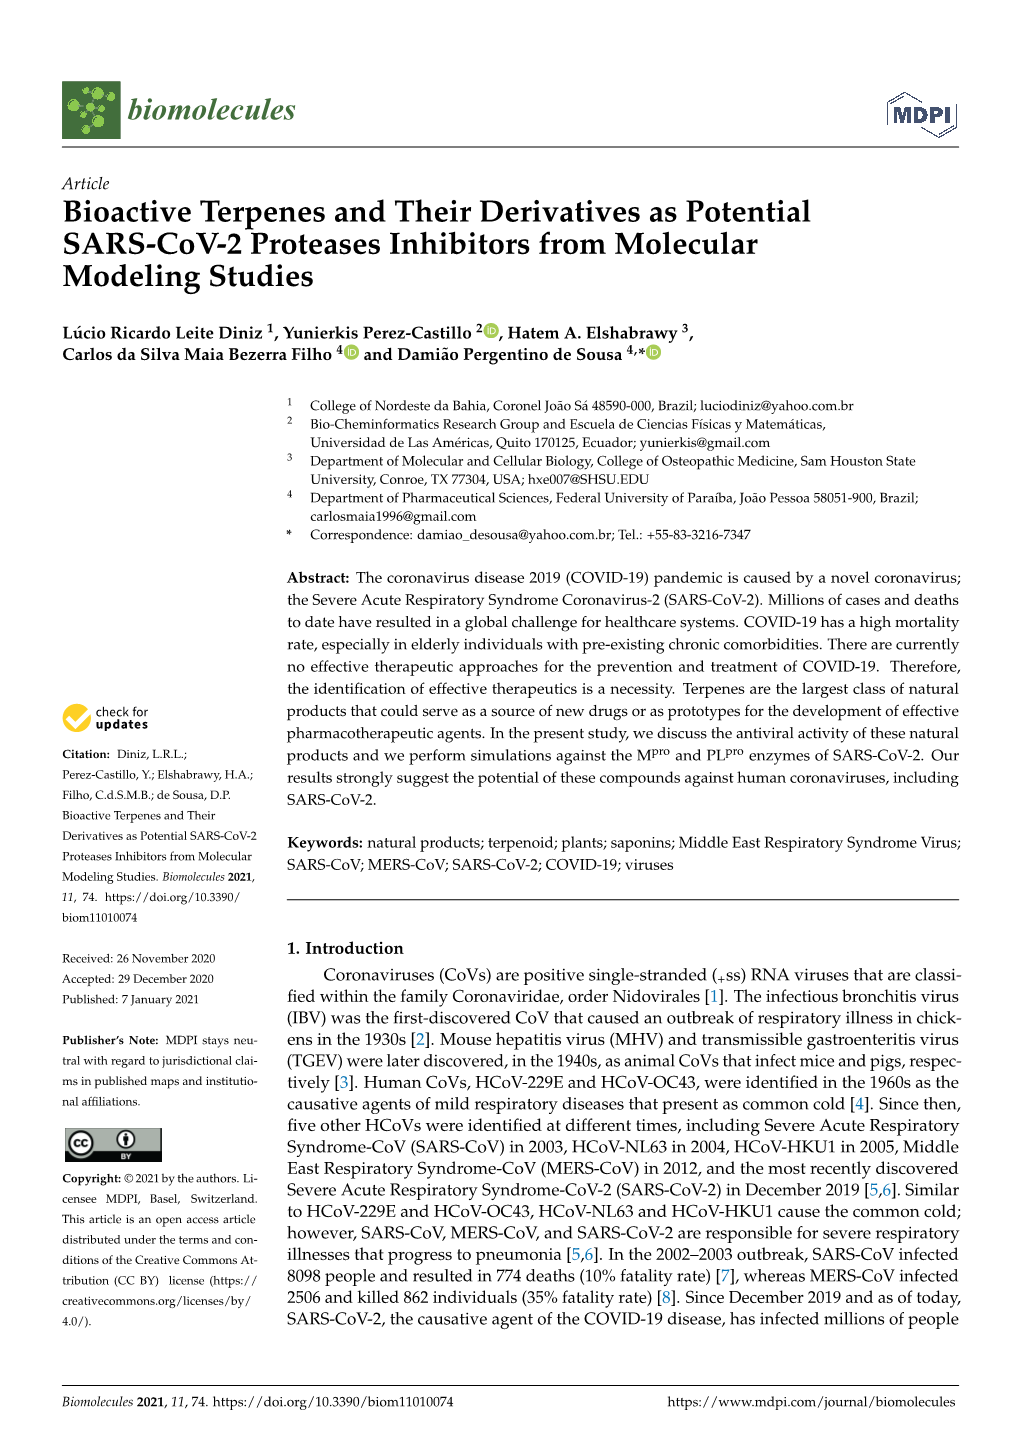 Bioactive Terpenes and Their Derivatives As Potential SARS-Cov-2 Proteases Inhibitors from Molecular Modeling Studies